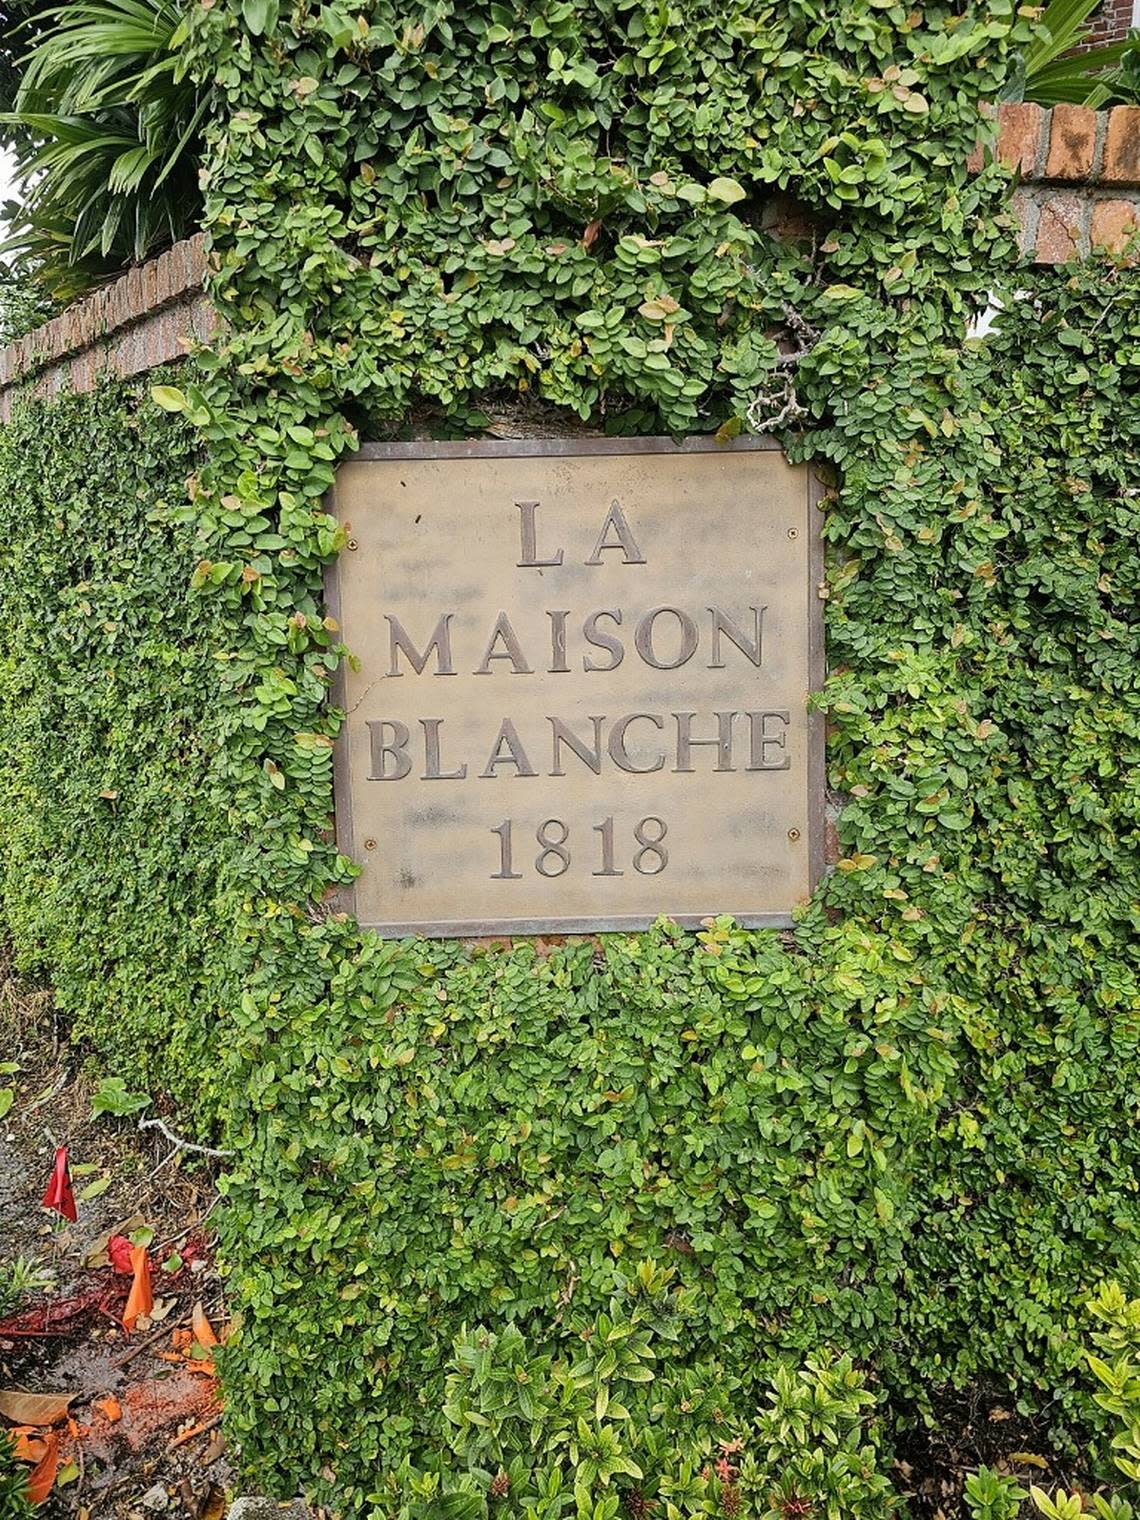 Even pavers and yard items are for auction at La Maison Blanche in Fort Lauderdale on Dec. 23, 2023.